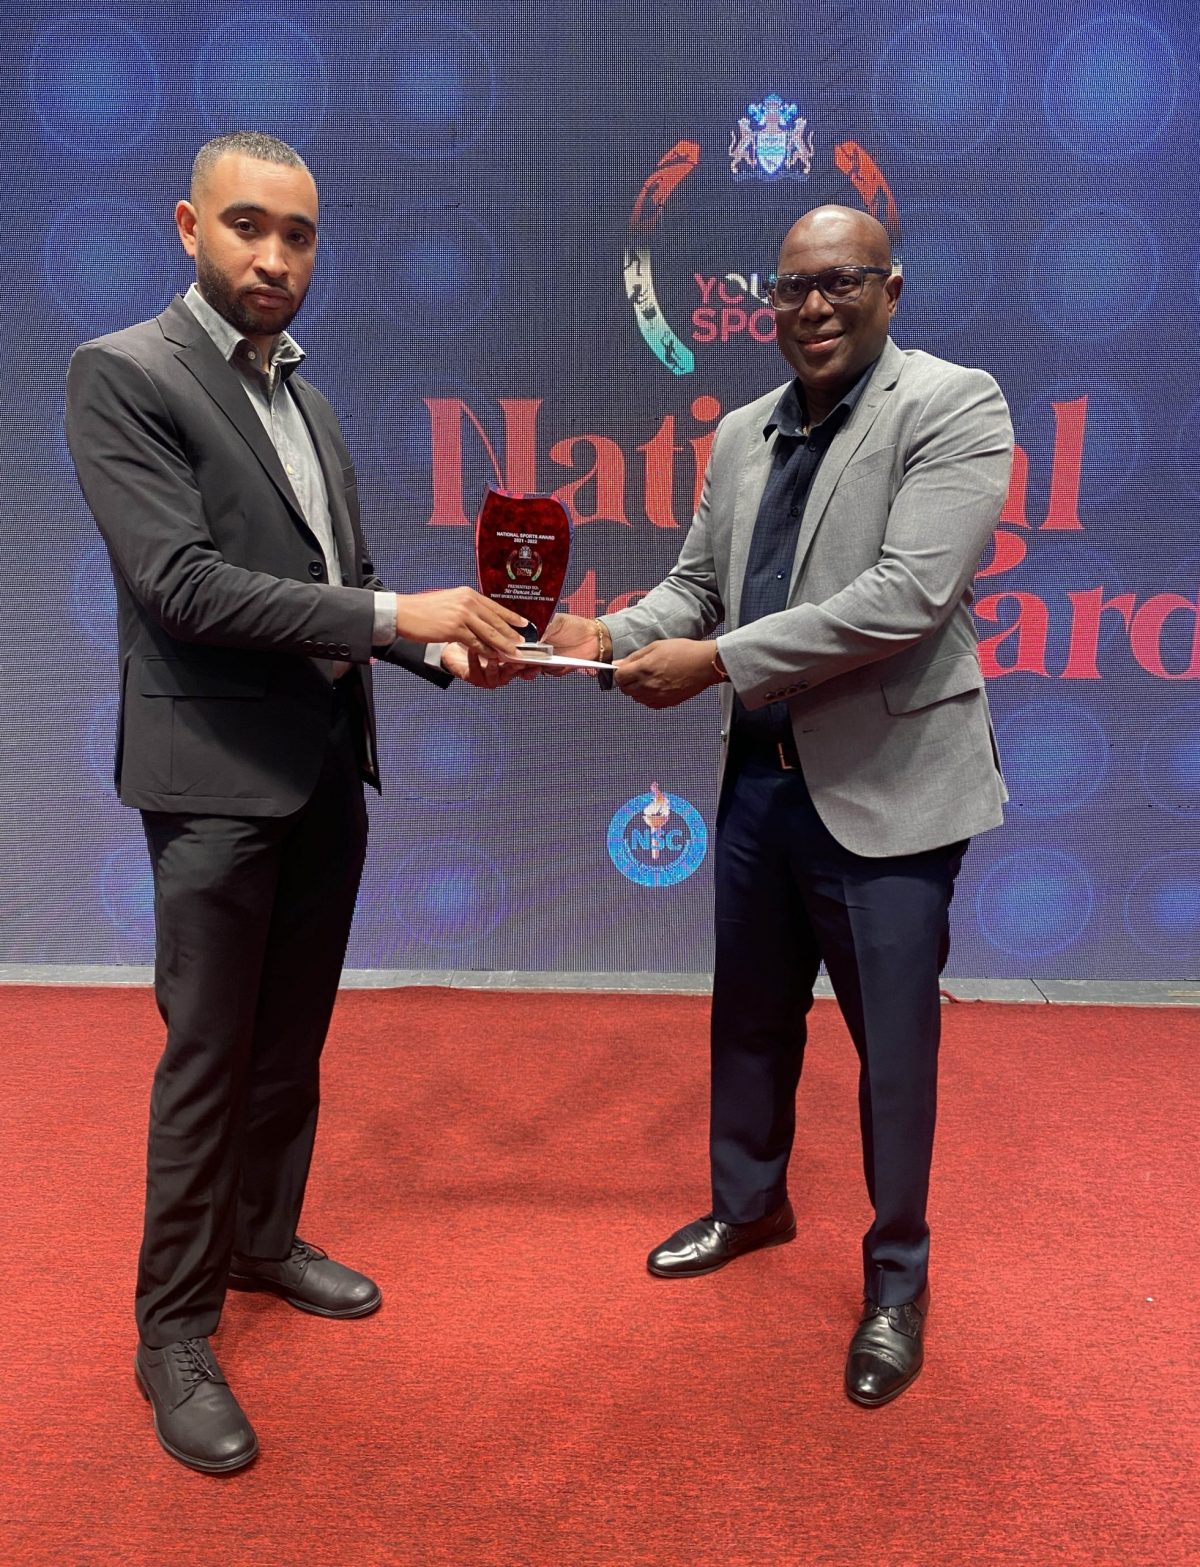 Stabroek News’ Duncan Saul won the Sports Journalist-of-the-Year (print) award. He was presented with his
accolade by Director of Sport, Steve Ninvalle himself a former Stabroek News reporter. (Emmerson Campbell photo)